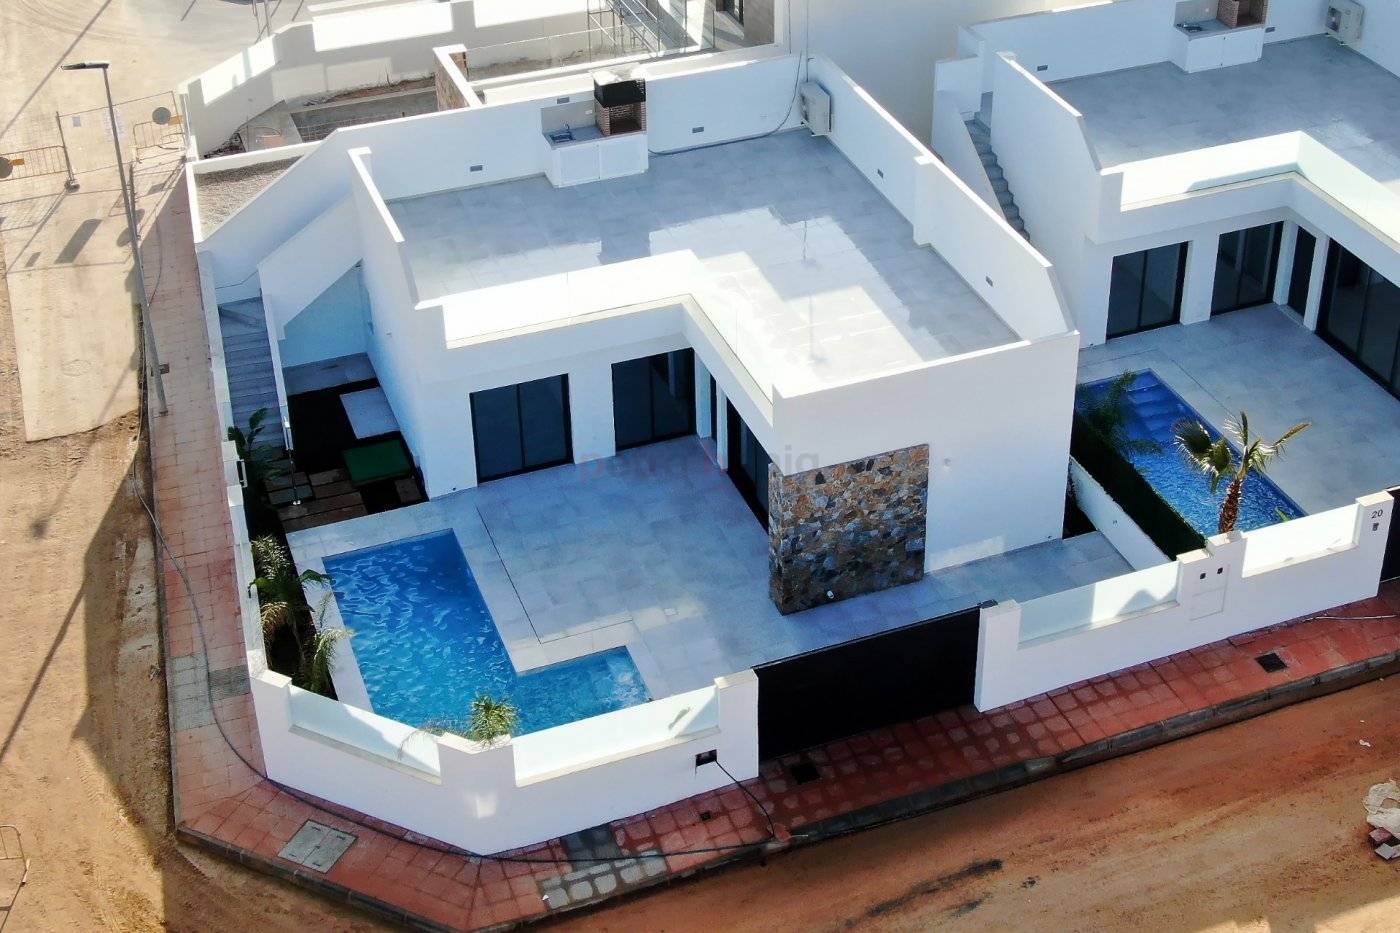 New build - Villa - Other areas - Dos mares